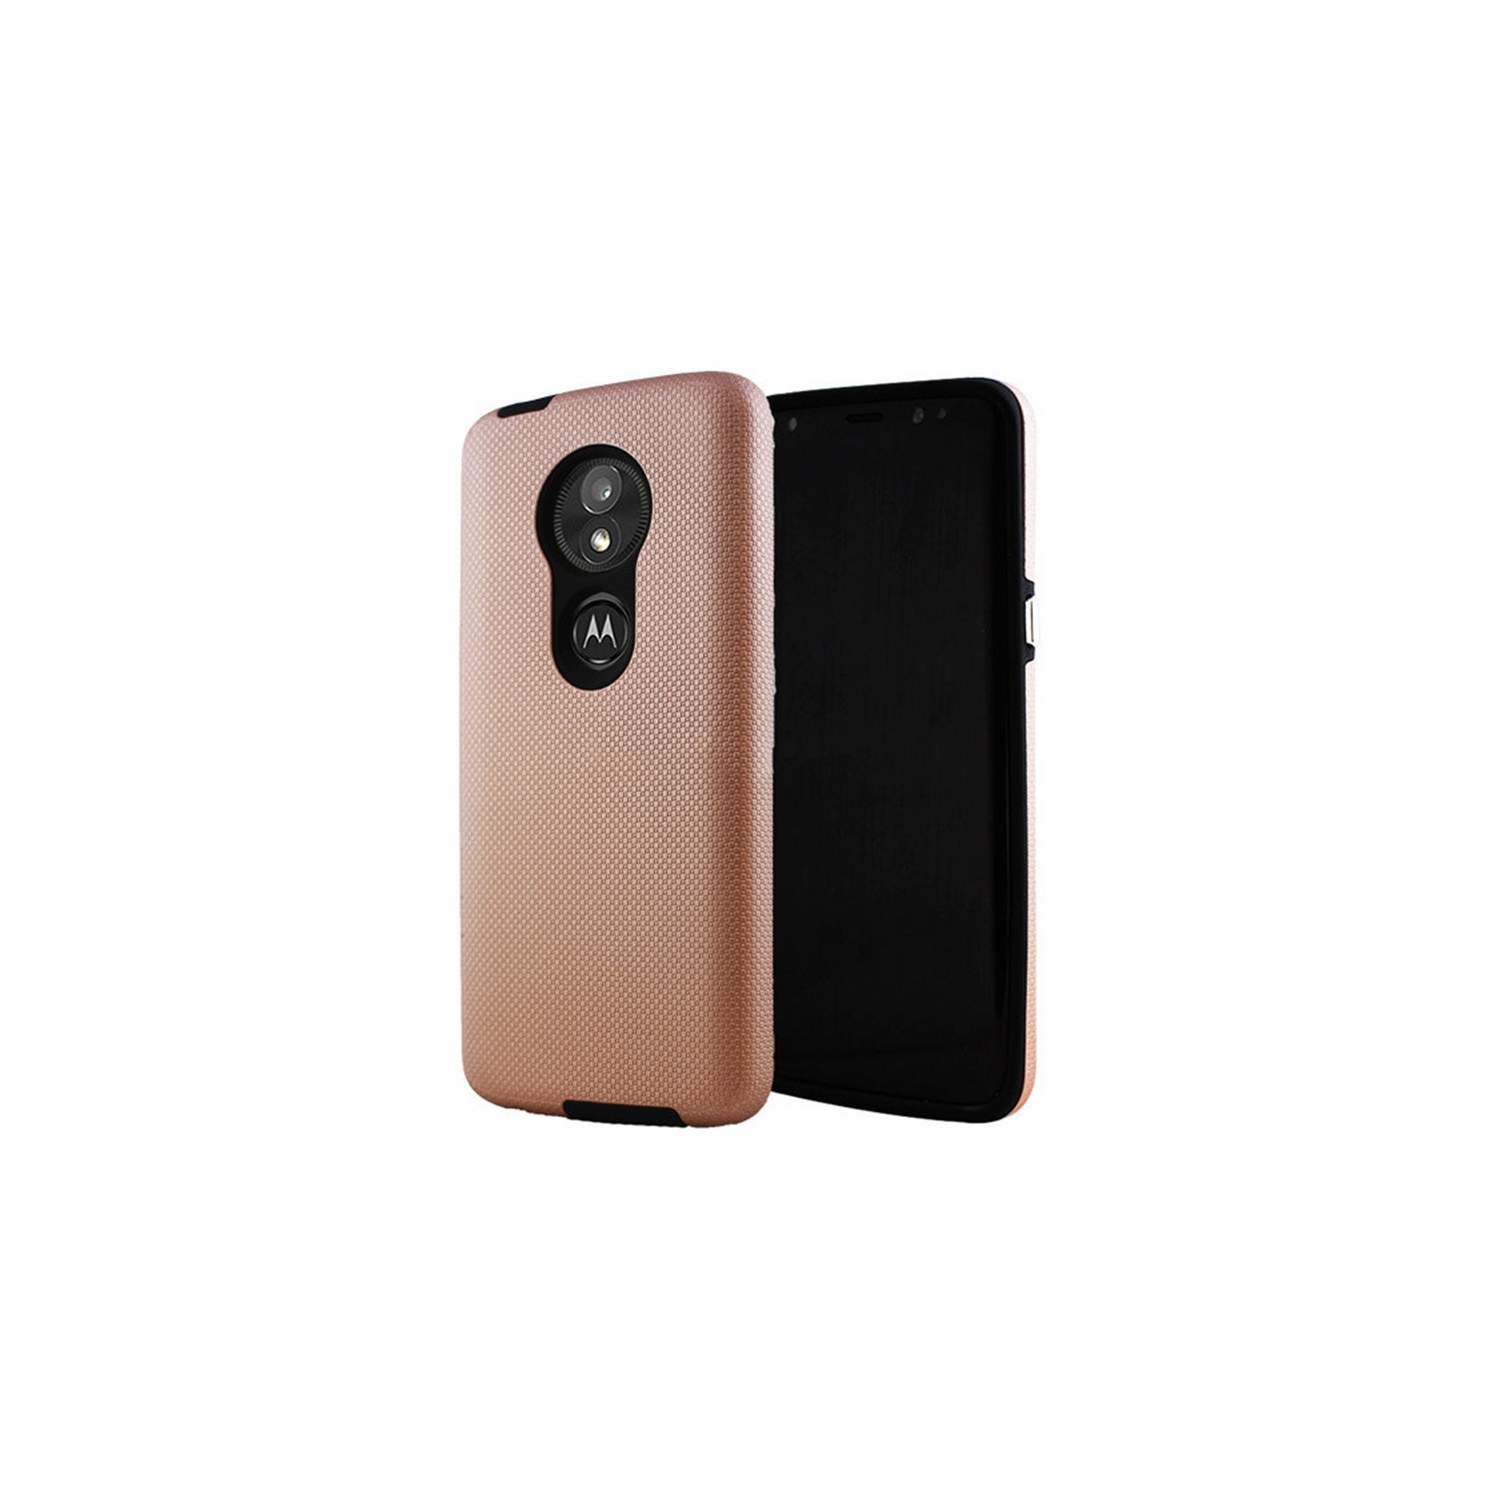 【CSmart】 Slim Fitted Hybrid Hard PC Shell Shockproof Scratch Resistant Case Cover for Motorola Moto G7 Play, Rose Gold